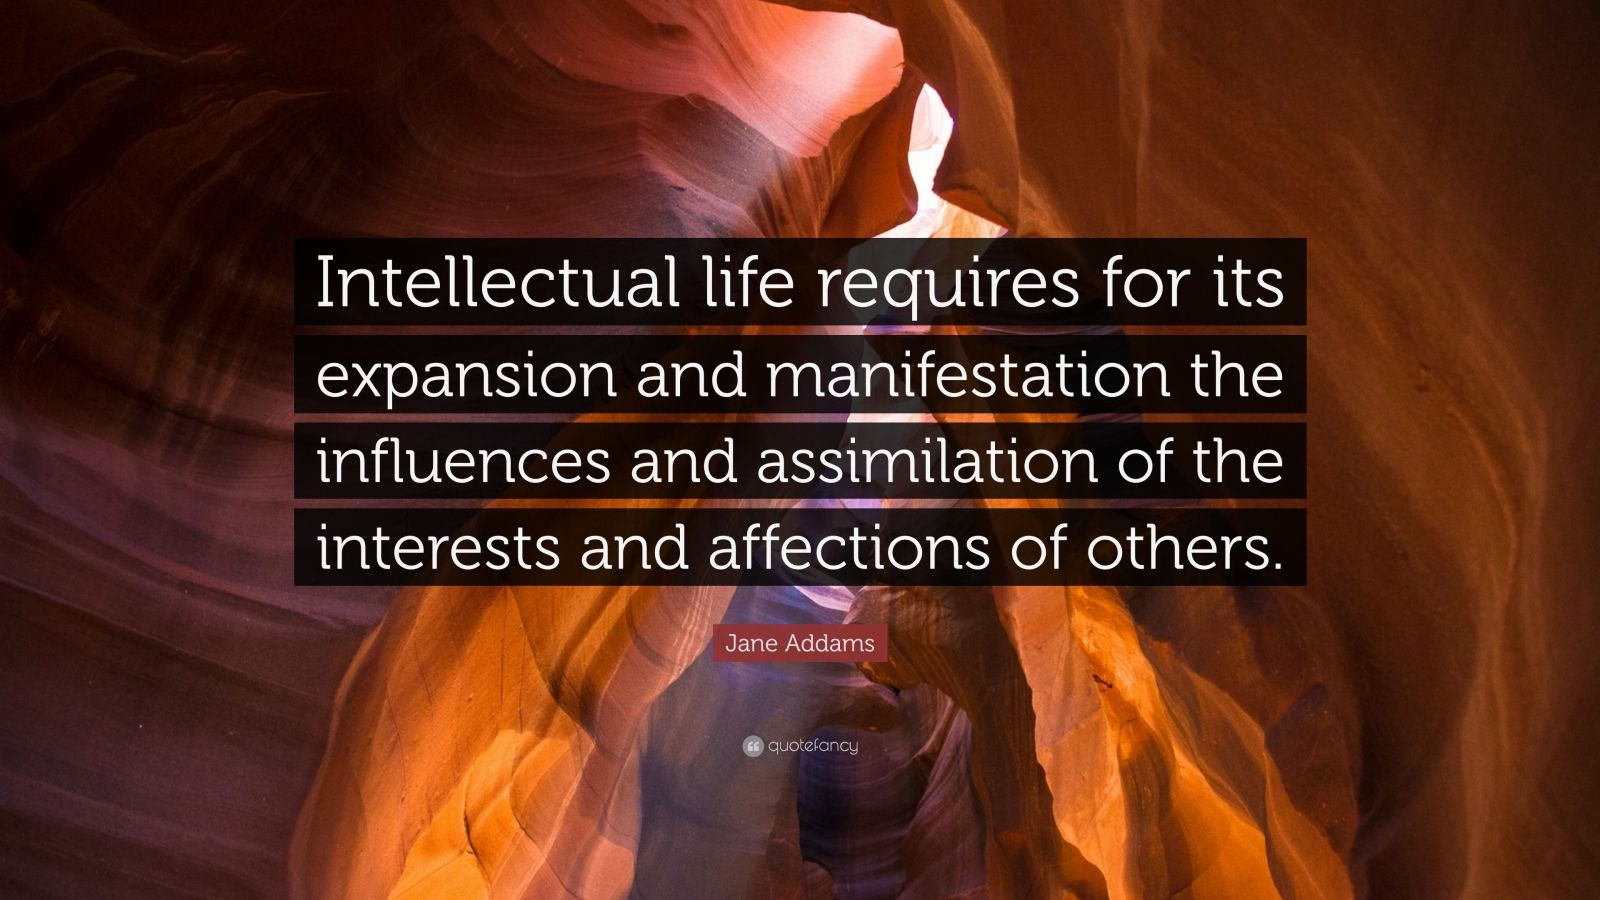 Jane Addams Quote “Intellectual life requires for its expansion and manifestation the influences and